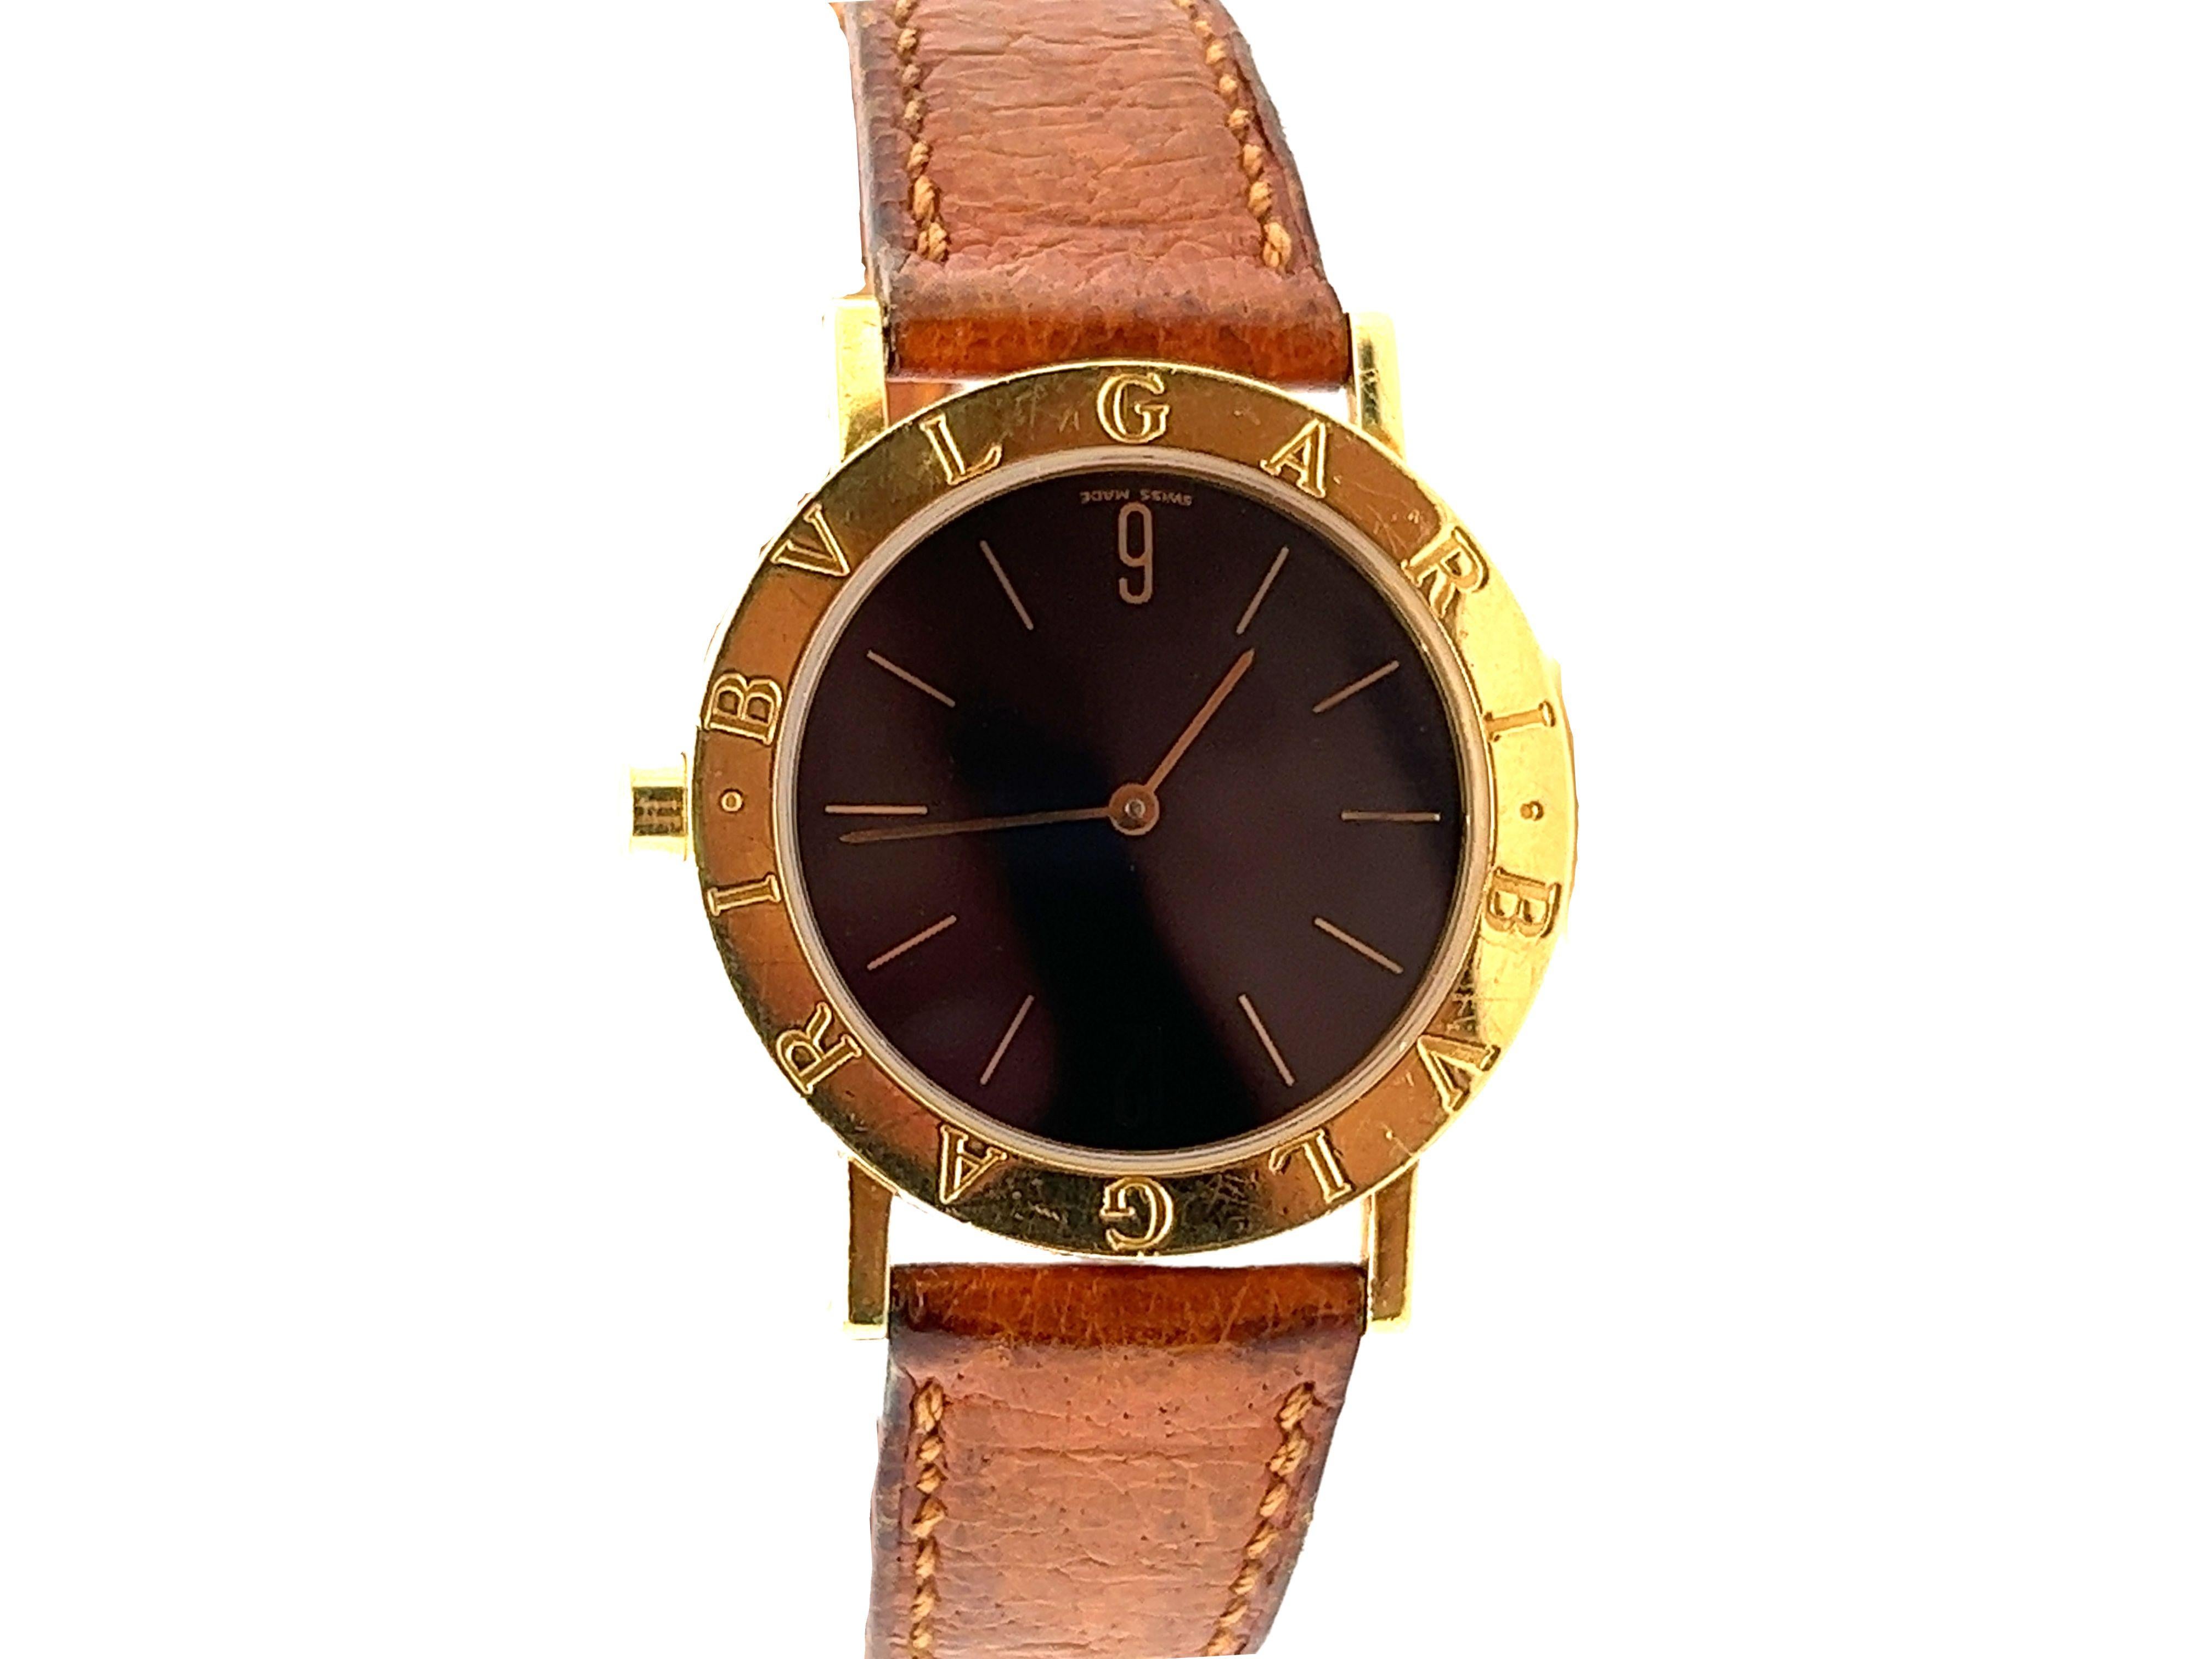 Bvlgari 18k yellow gold 33m case men's watch with leather strap. Reference Bb30 GI, serial G14112, with quartz movement, black dial, golden stick hour markers
and the legendary 